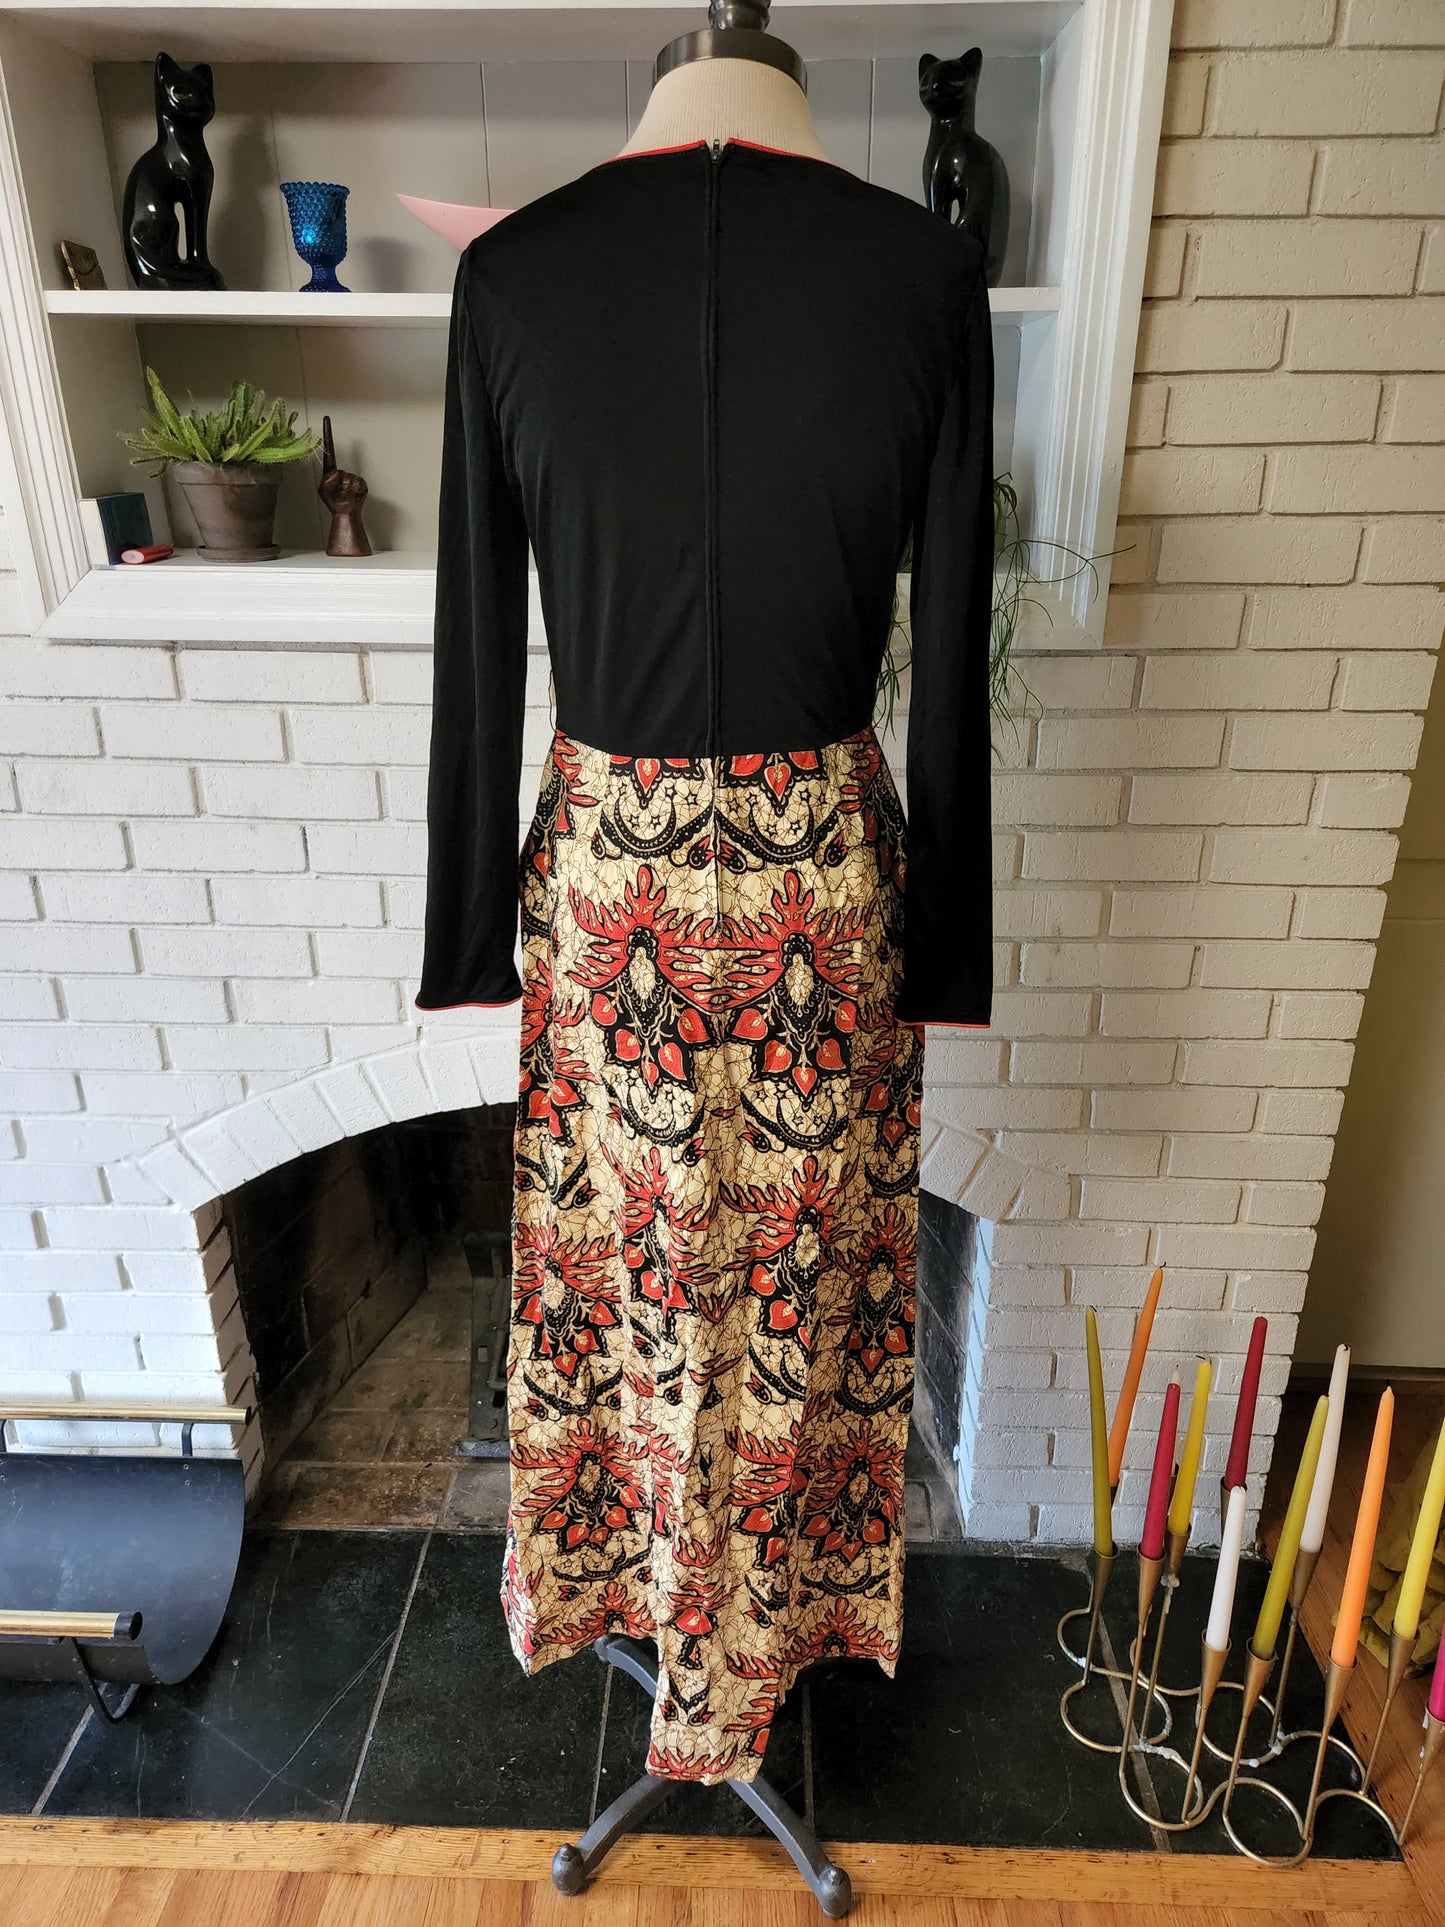 Vintage Long Sleeve Floral and Black Dress by Rona